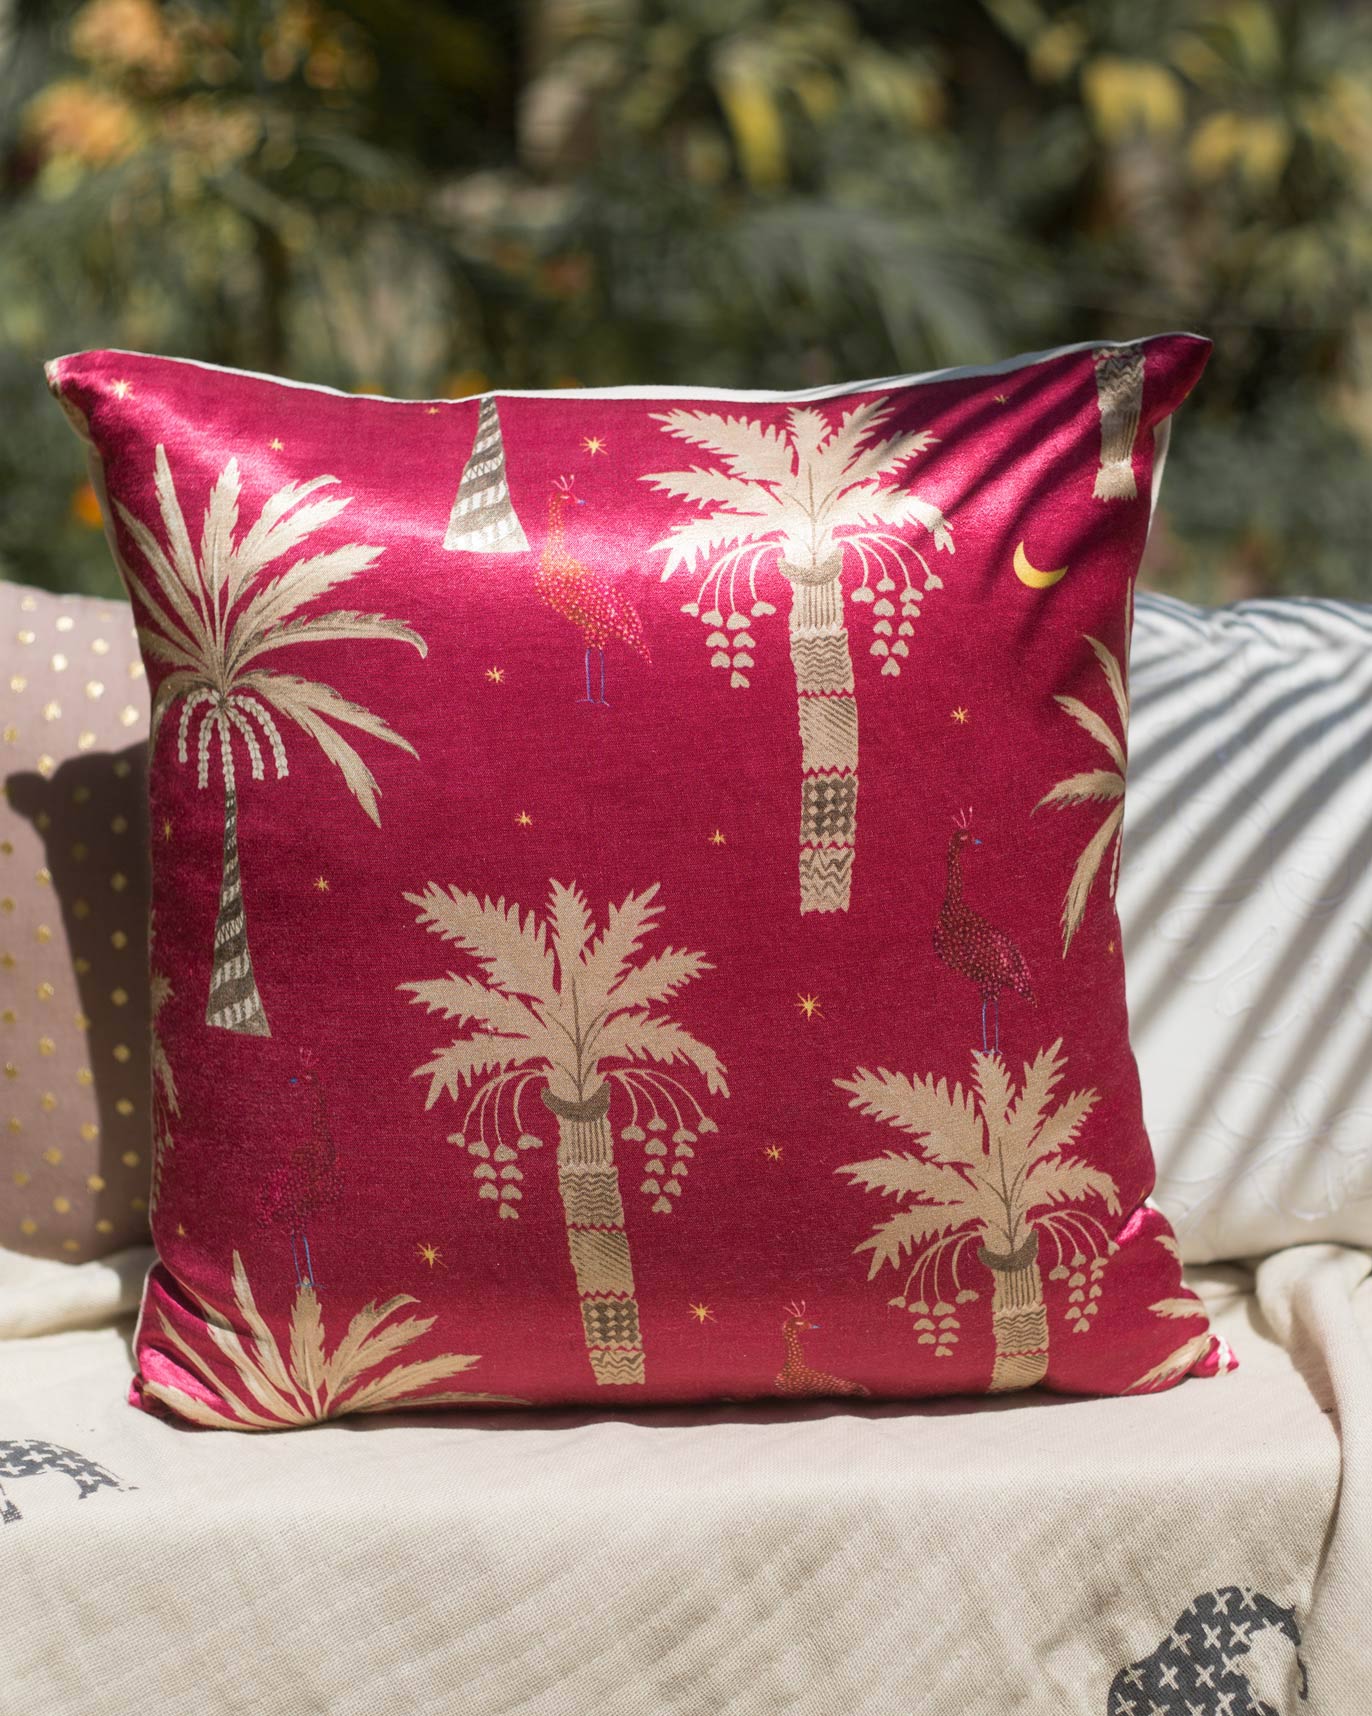 Palm Tree Cushion Cover - Pink